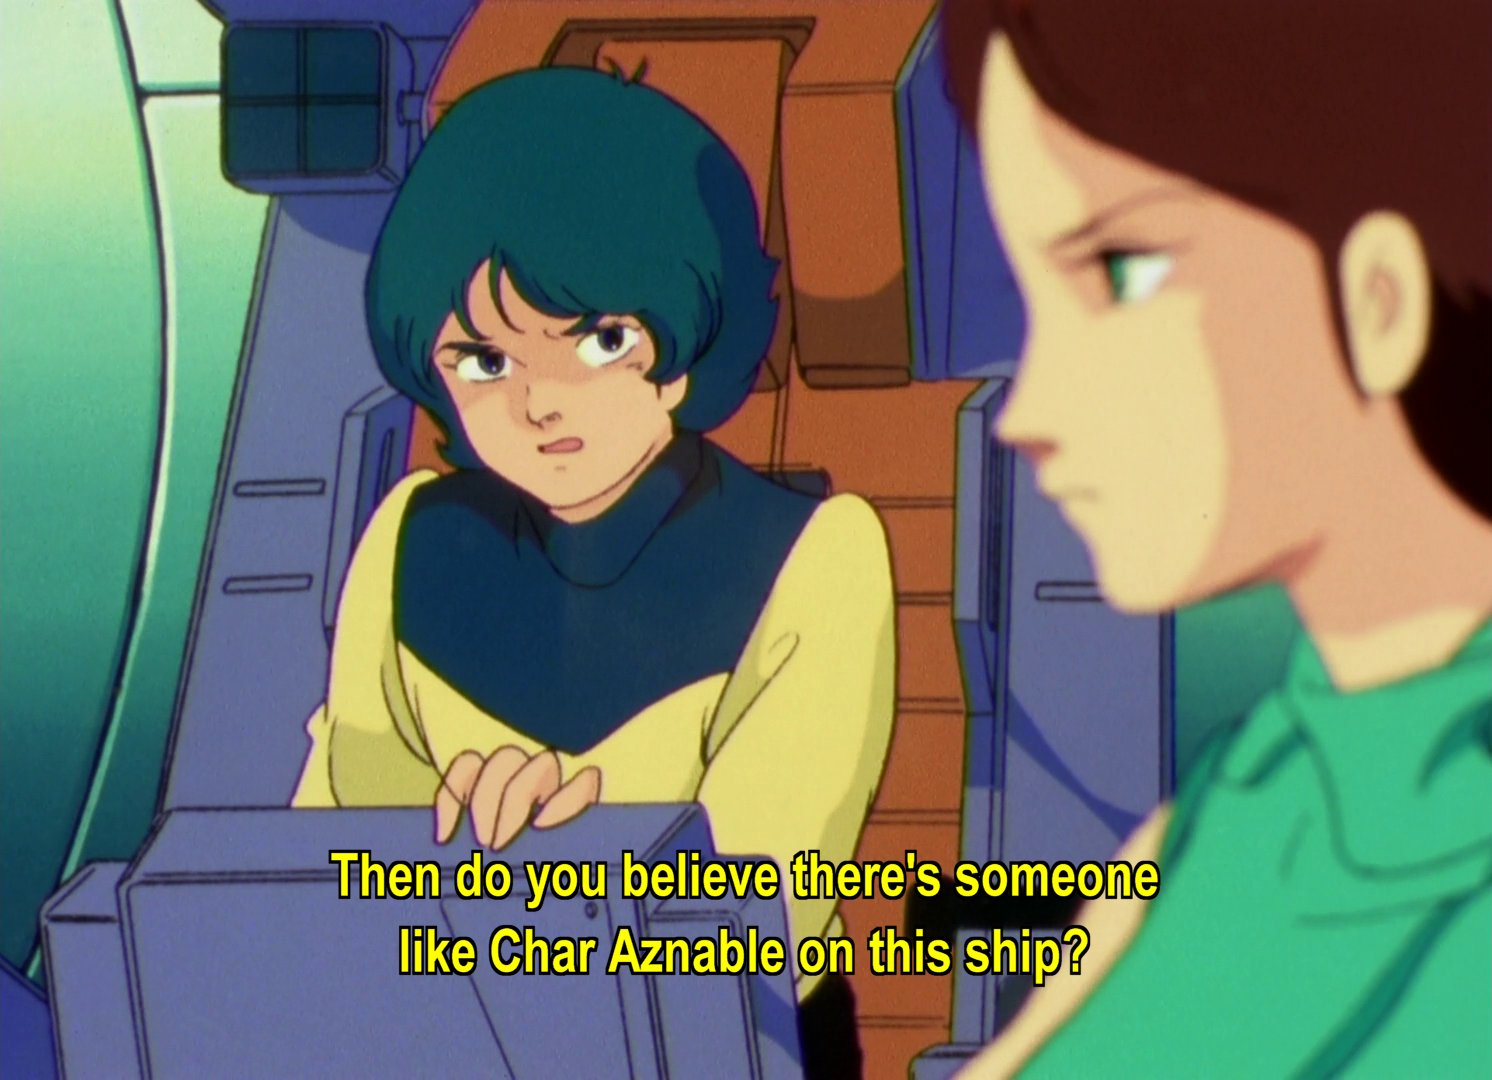 Kamille, angry in his gundam, talking to Emma: Then do you believe there's someone like Char Aznable on this ship?